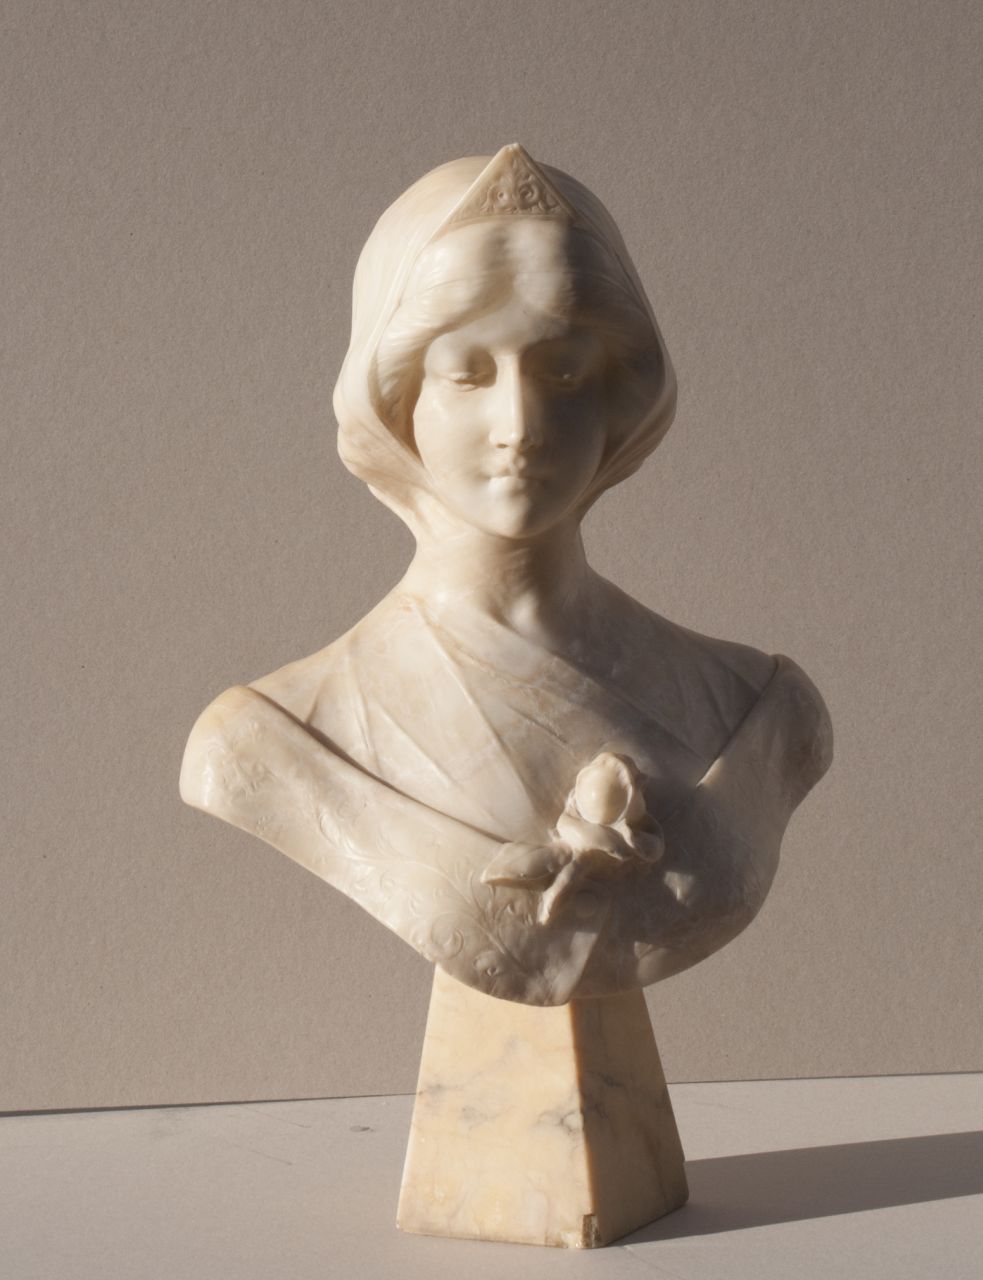 U. Biagini | Bust of a young woman, alabaster, 60.0 x 40.0 cm, signed on the back